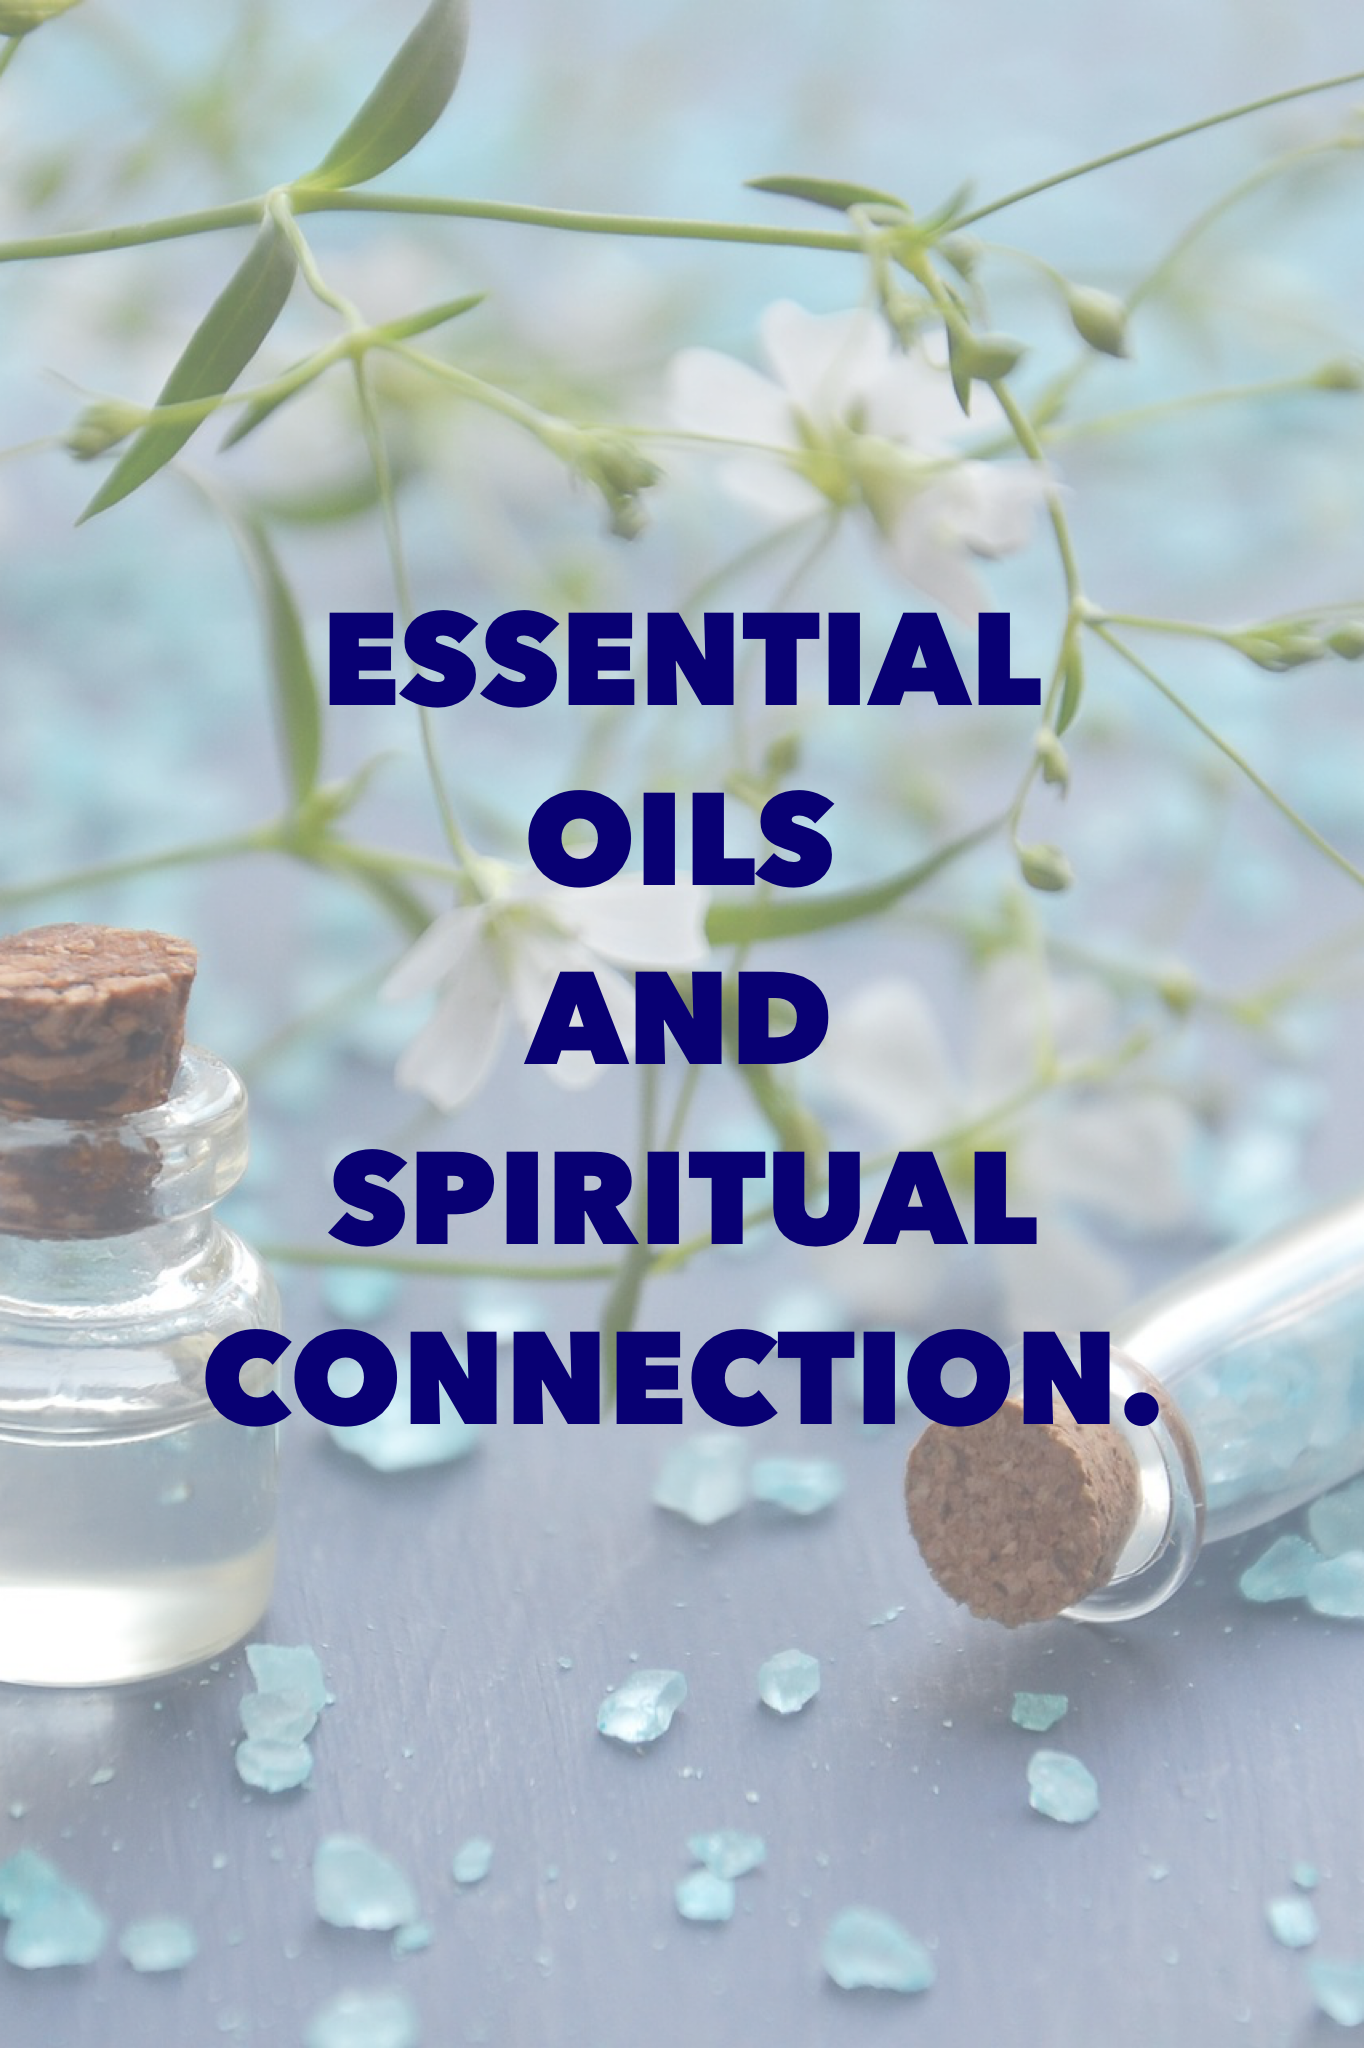 Essential Oils and spiritual connection.